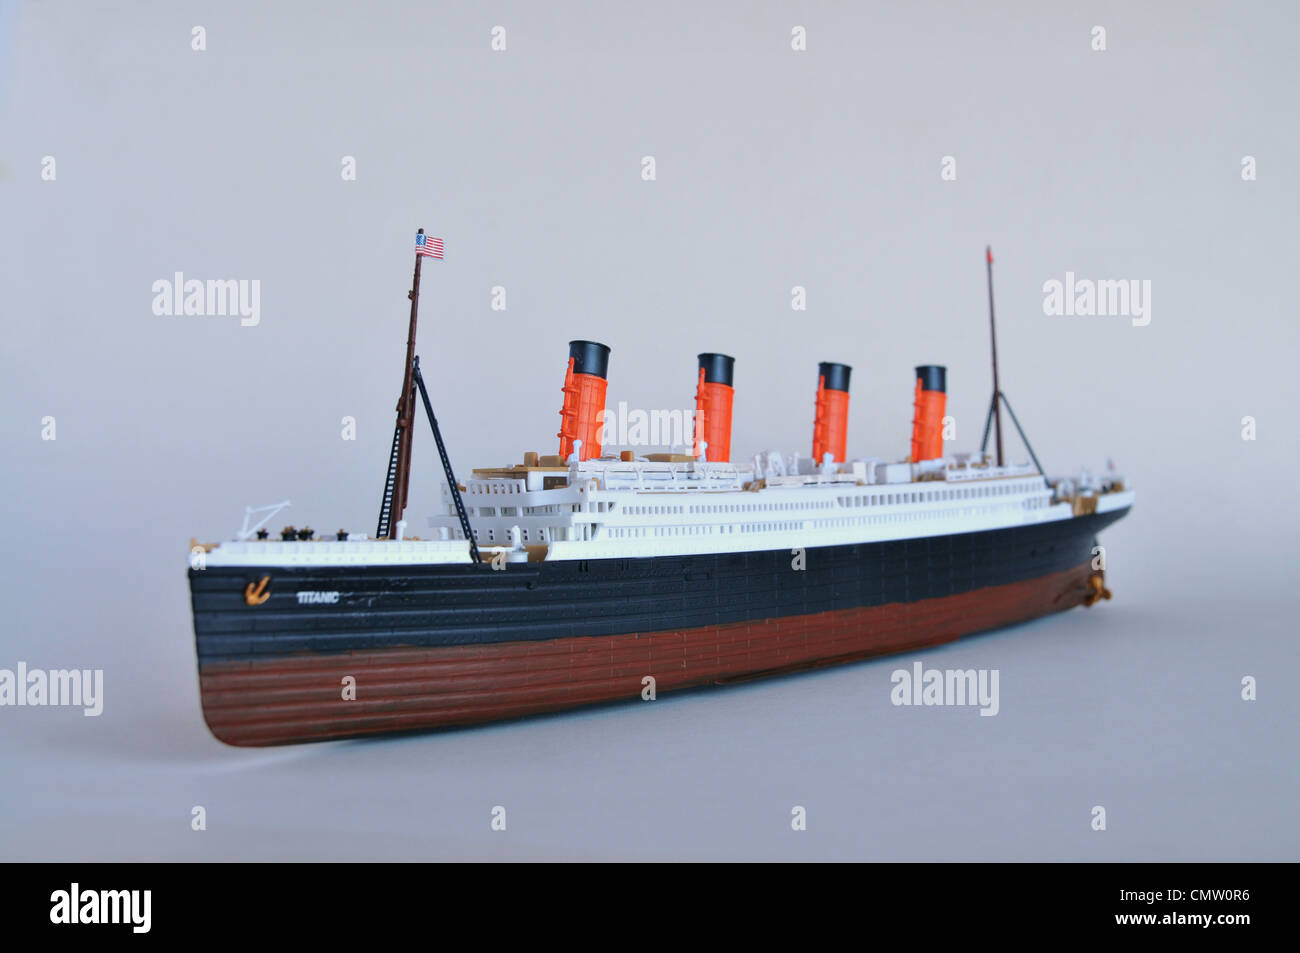 Accurate replica kit model of the Titanic ship set against a blue background. Stock Photo